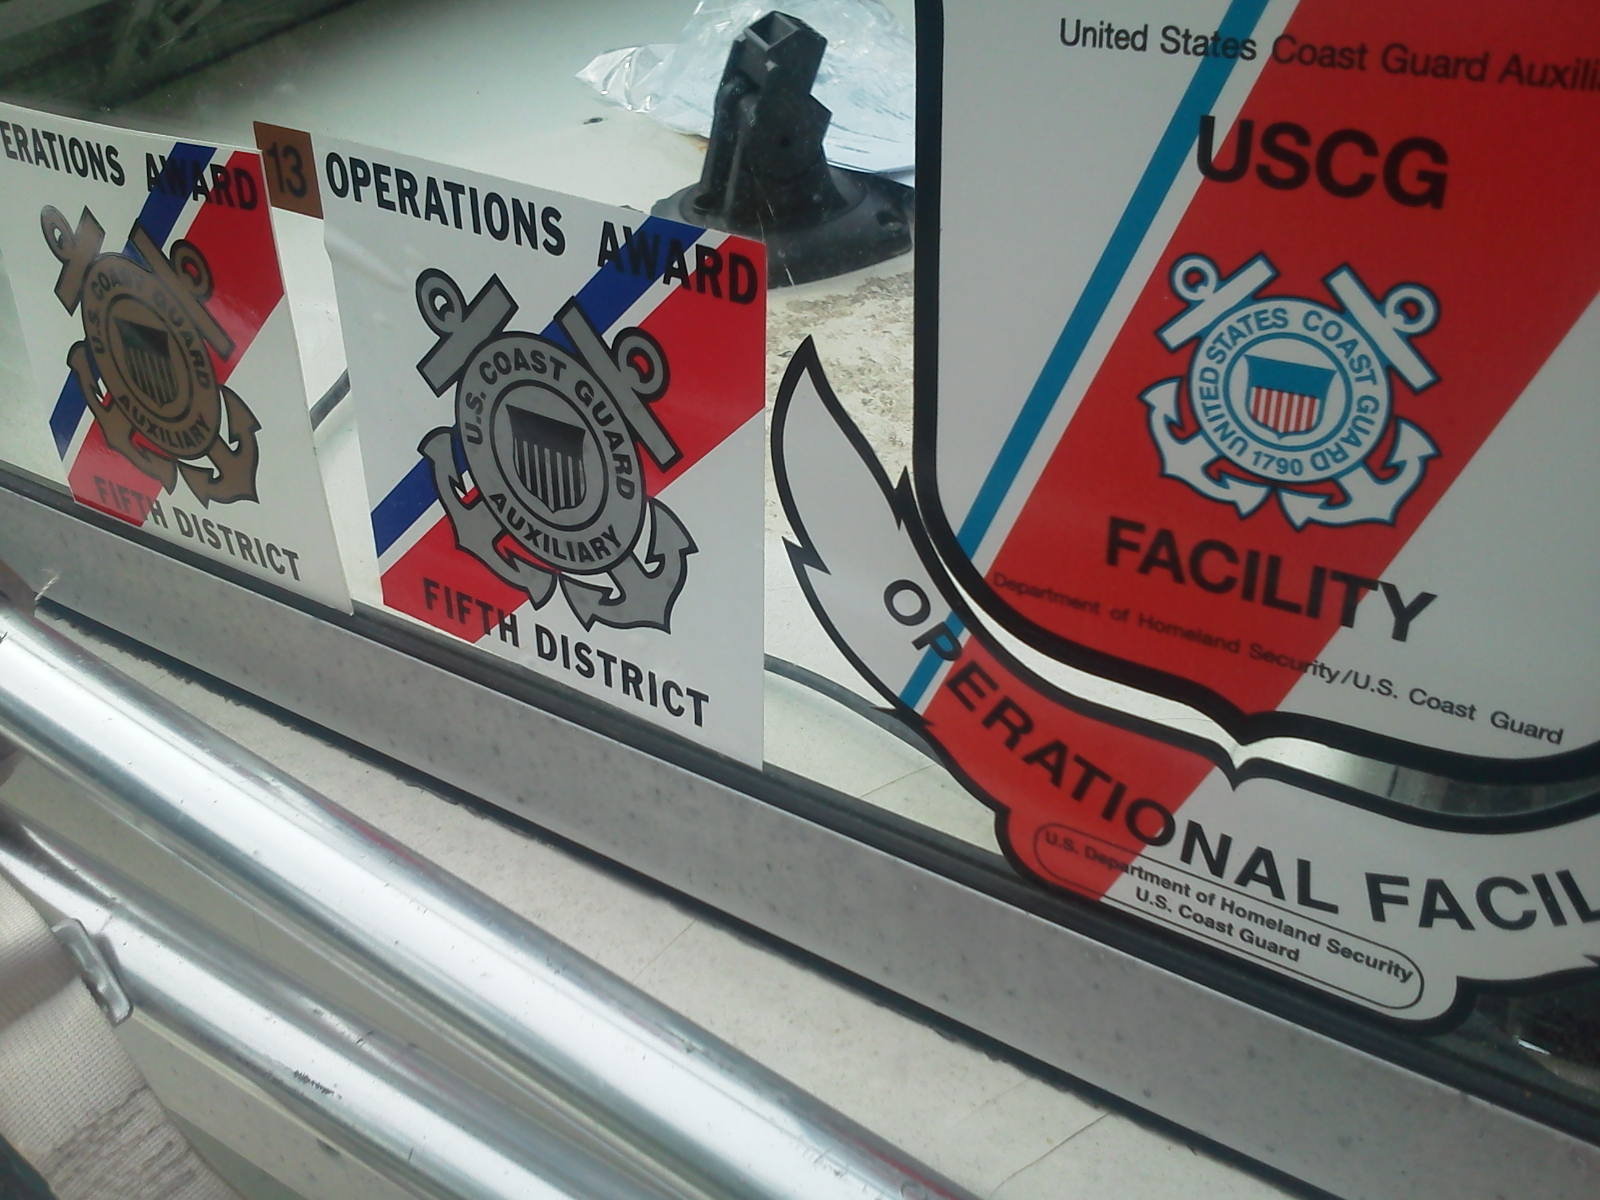 Coast Guard Auxiliary operations decals